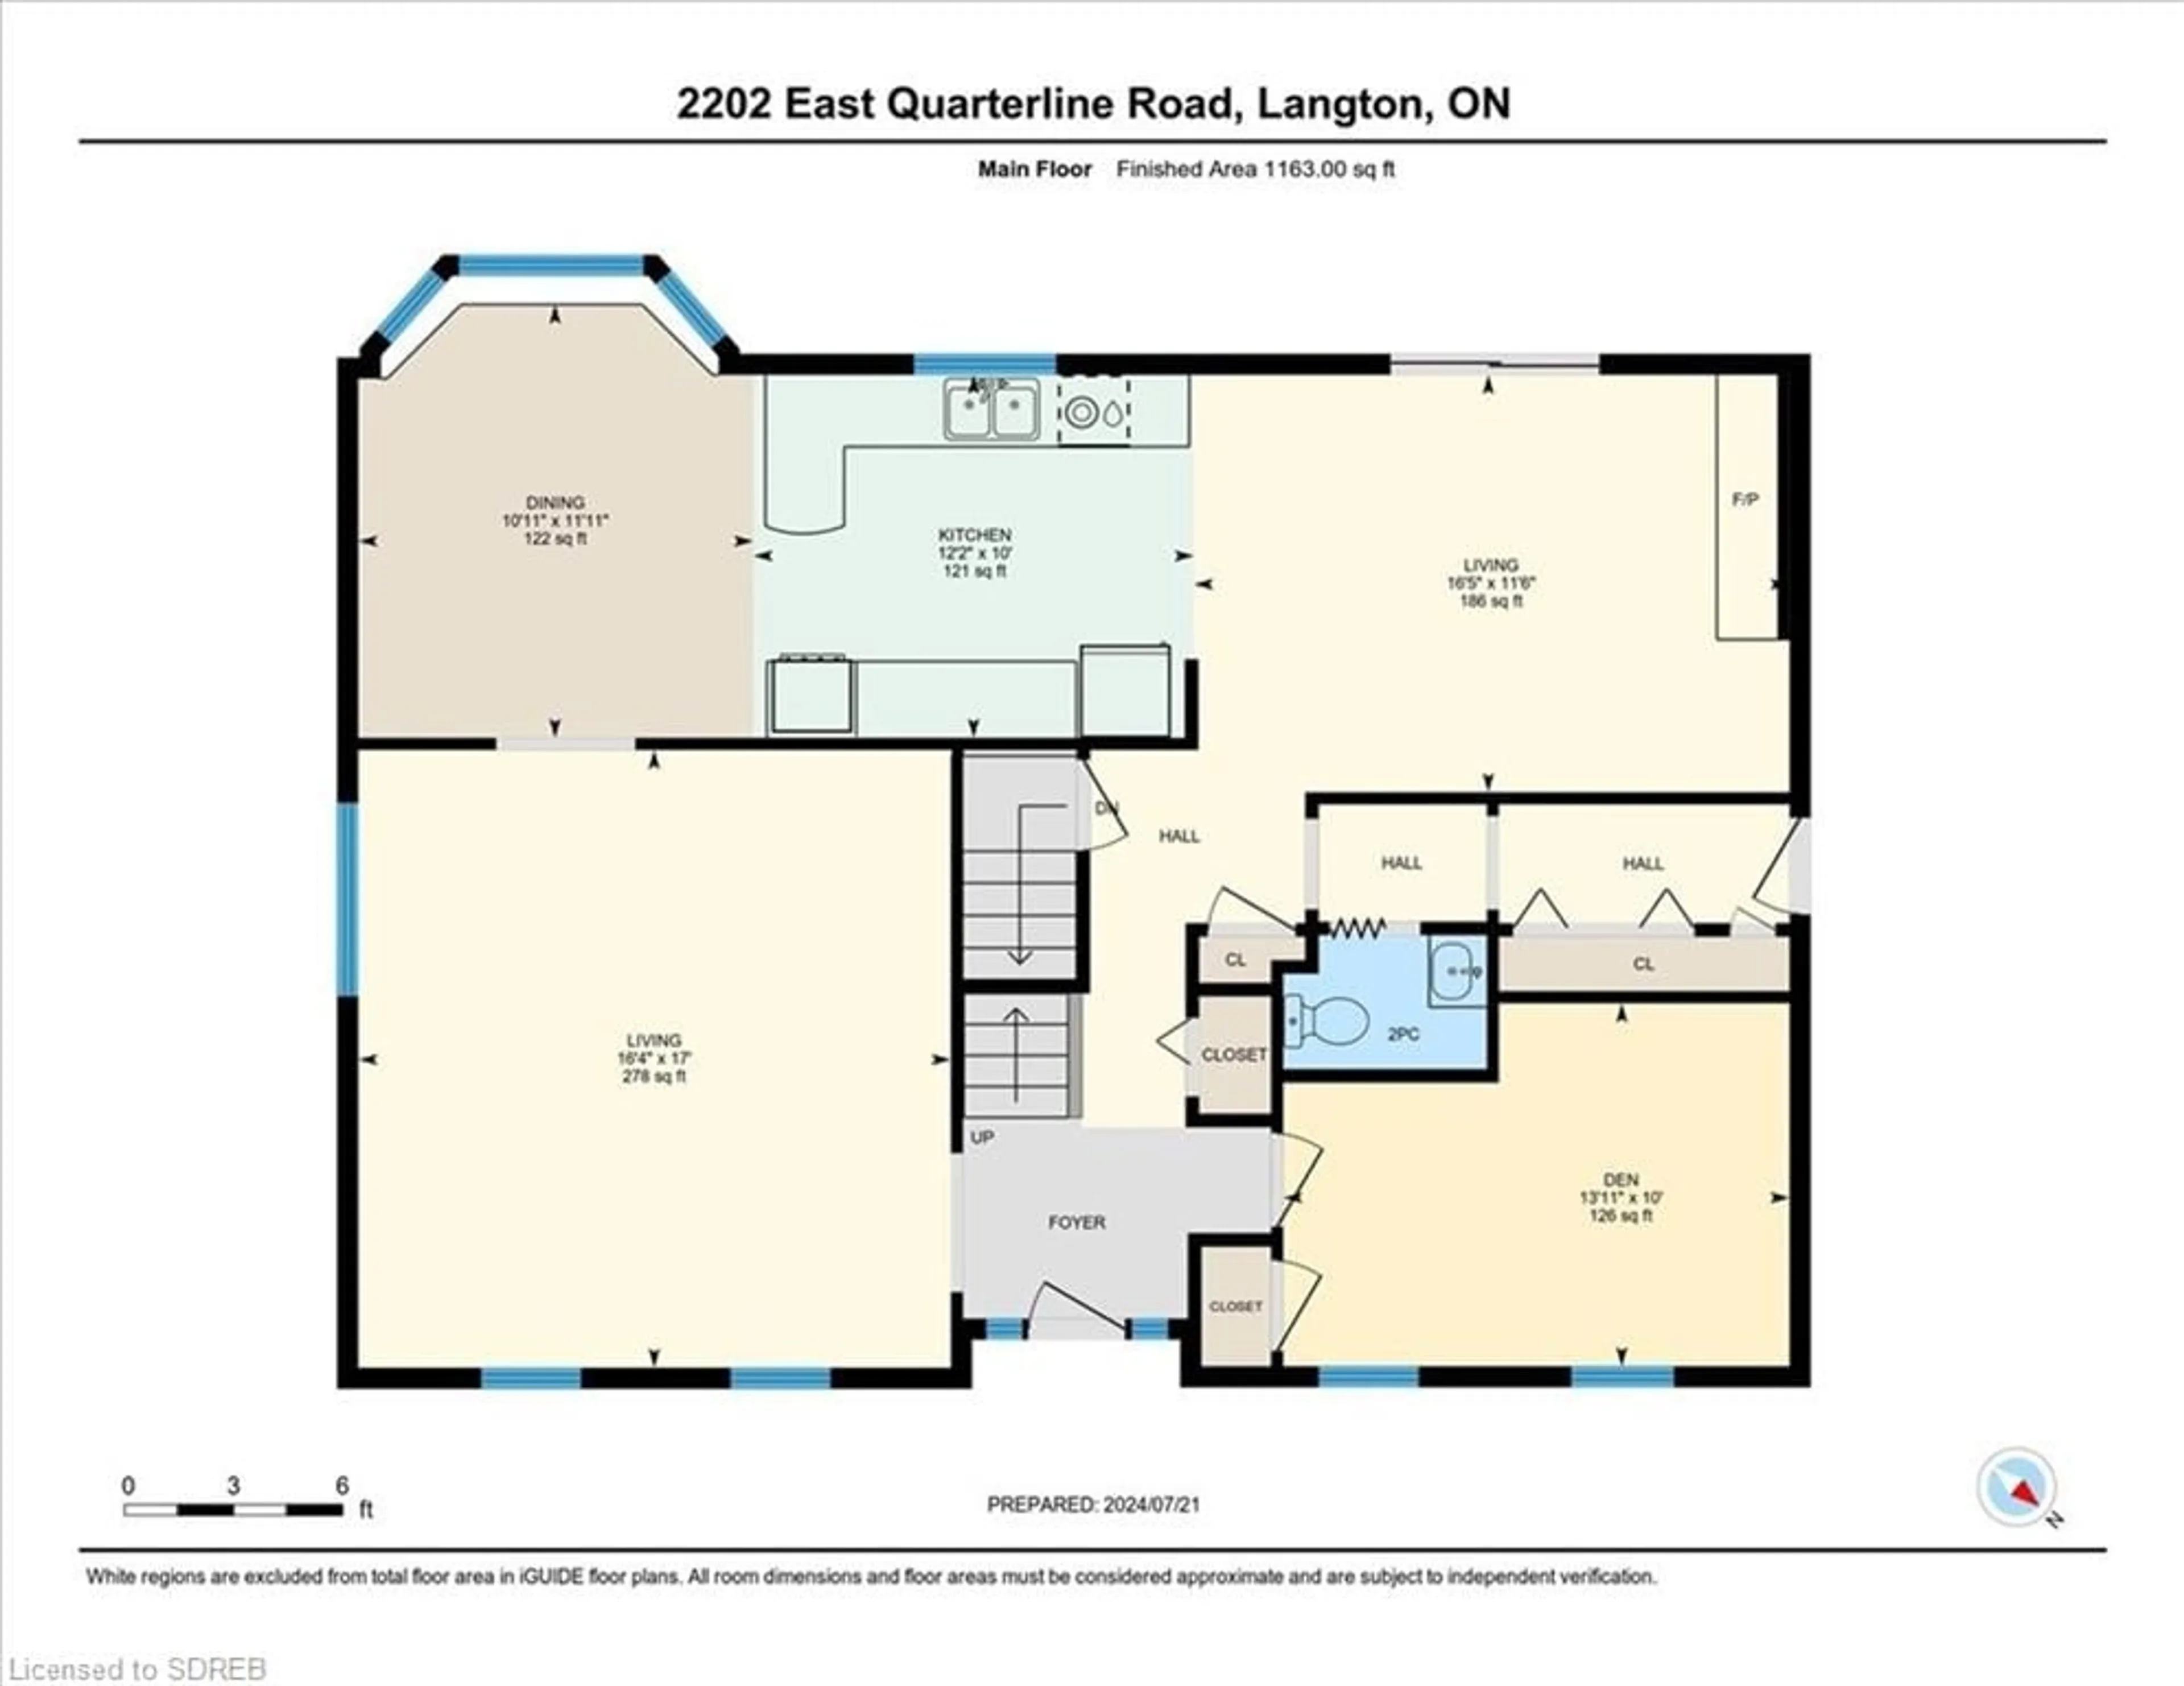 Floor plan for 2202 East Quarter Line Rd, Wyecombe Ontario N4B 2W4